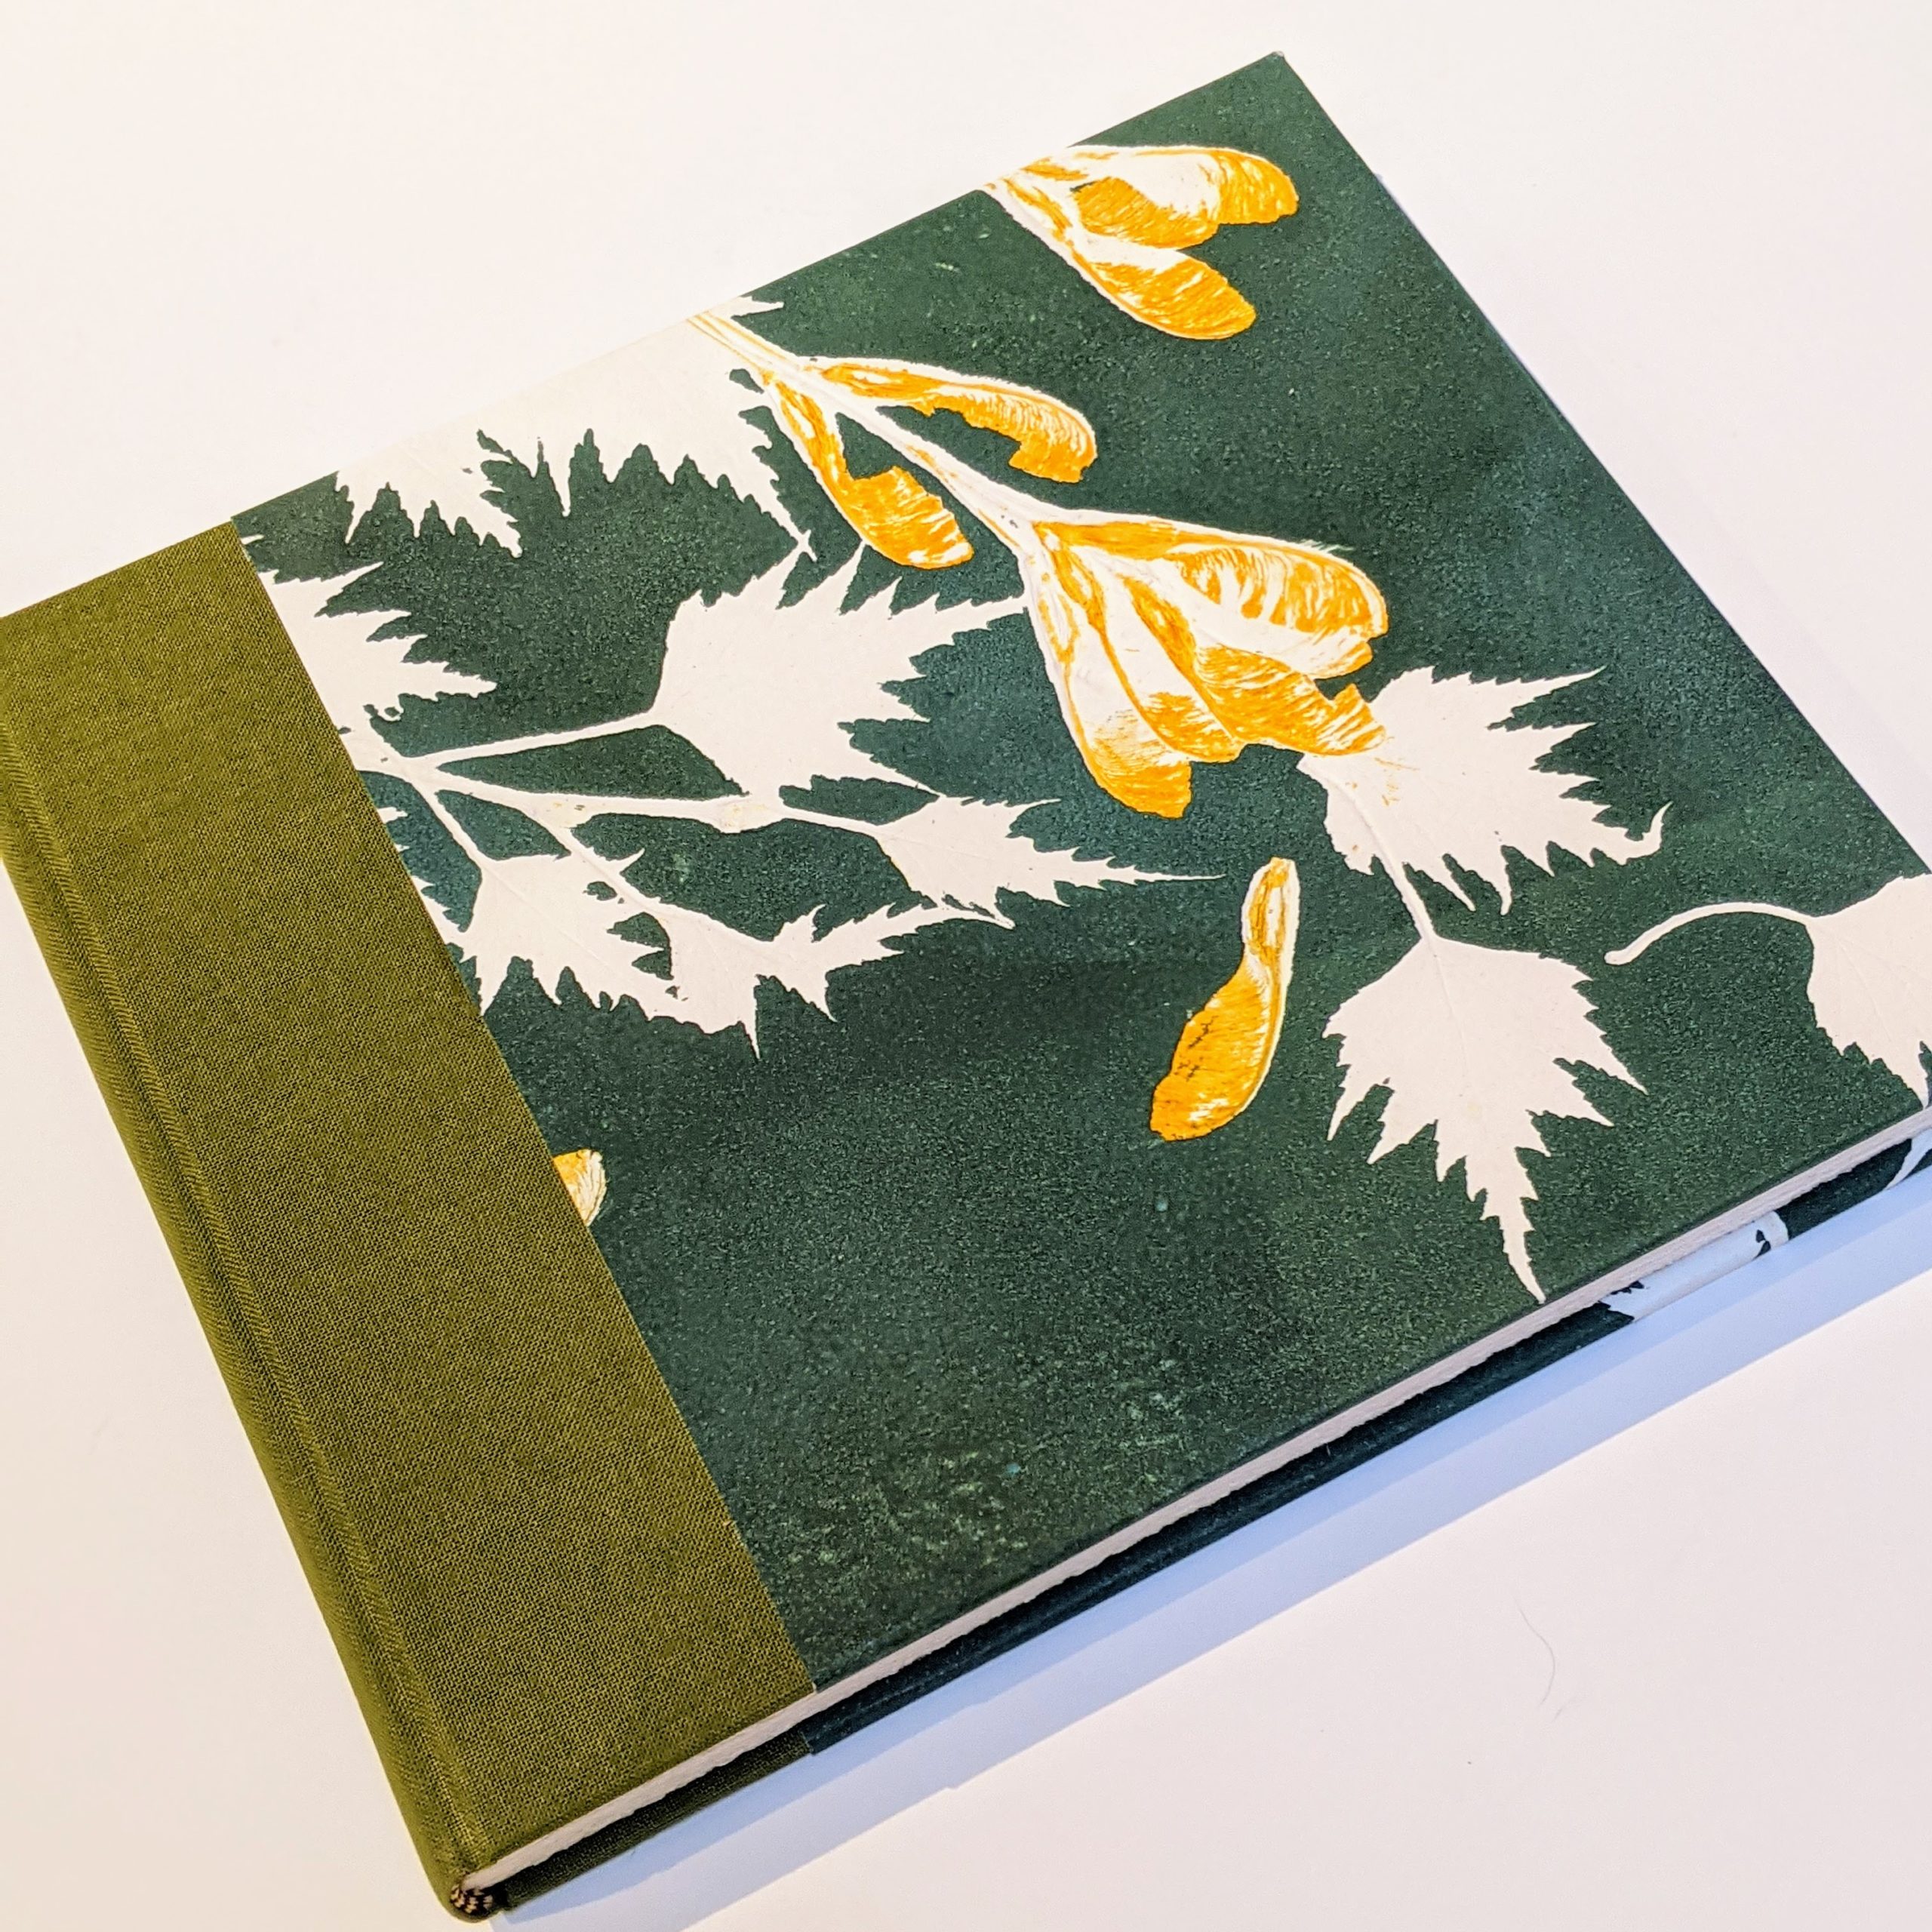 Two-Day Hand Bookbinding Workshop - 1 + 1 = 1 Gallery